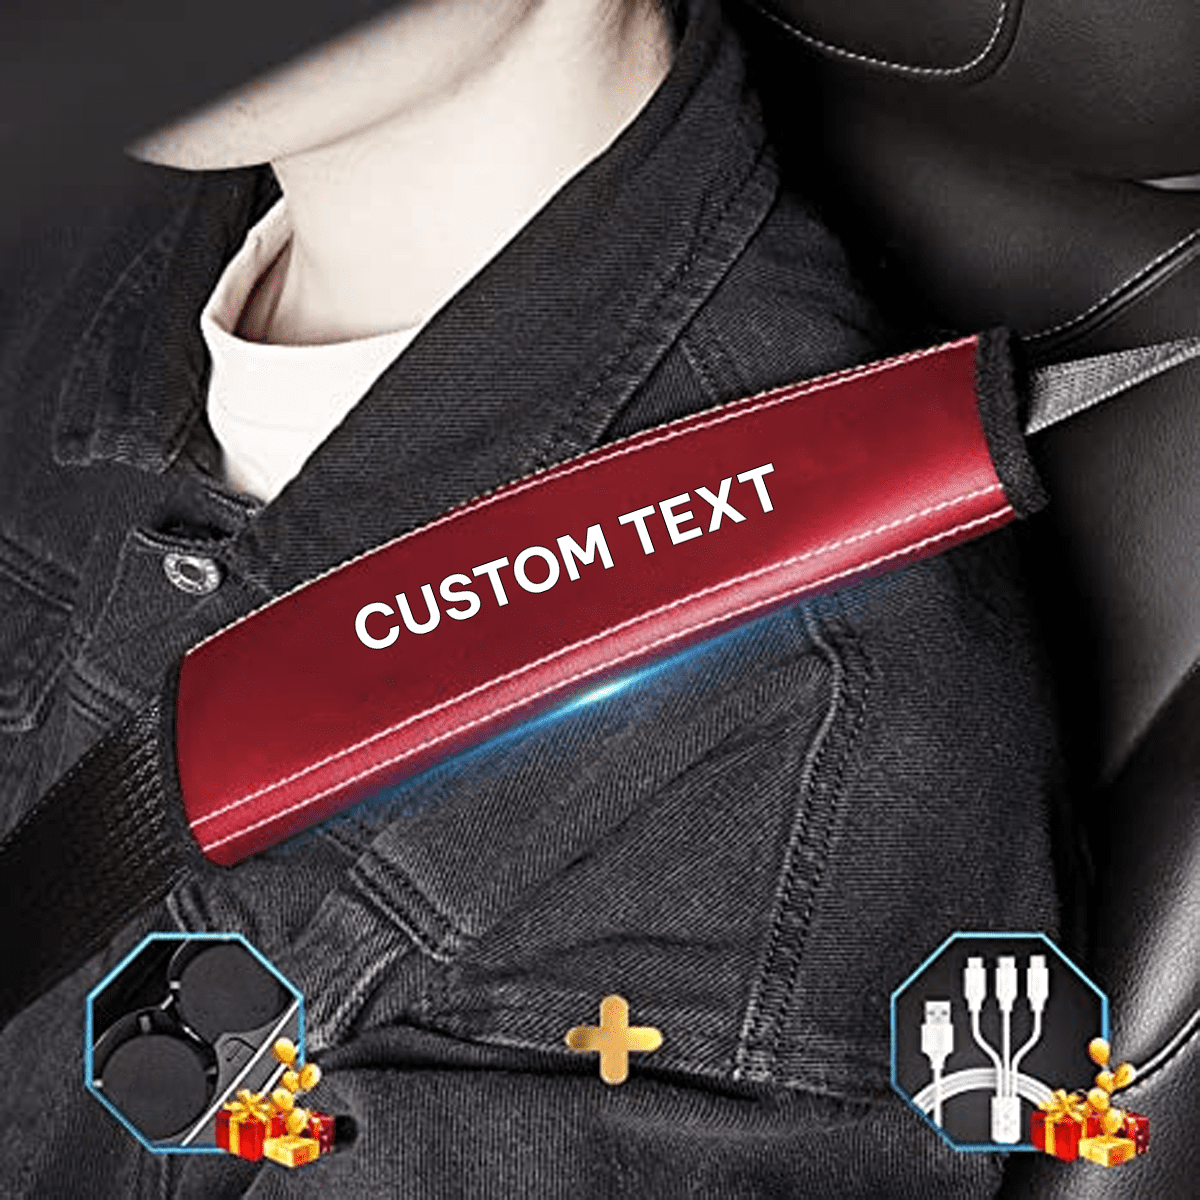 Custom Text and Logo Seat Belt Covers, Fit with Ford, Microfiber Leather Seat Belt Shoulder Pads for More Comfortable Driving, Set of 2pcs - Delicate Leather